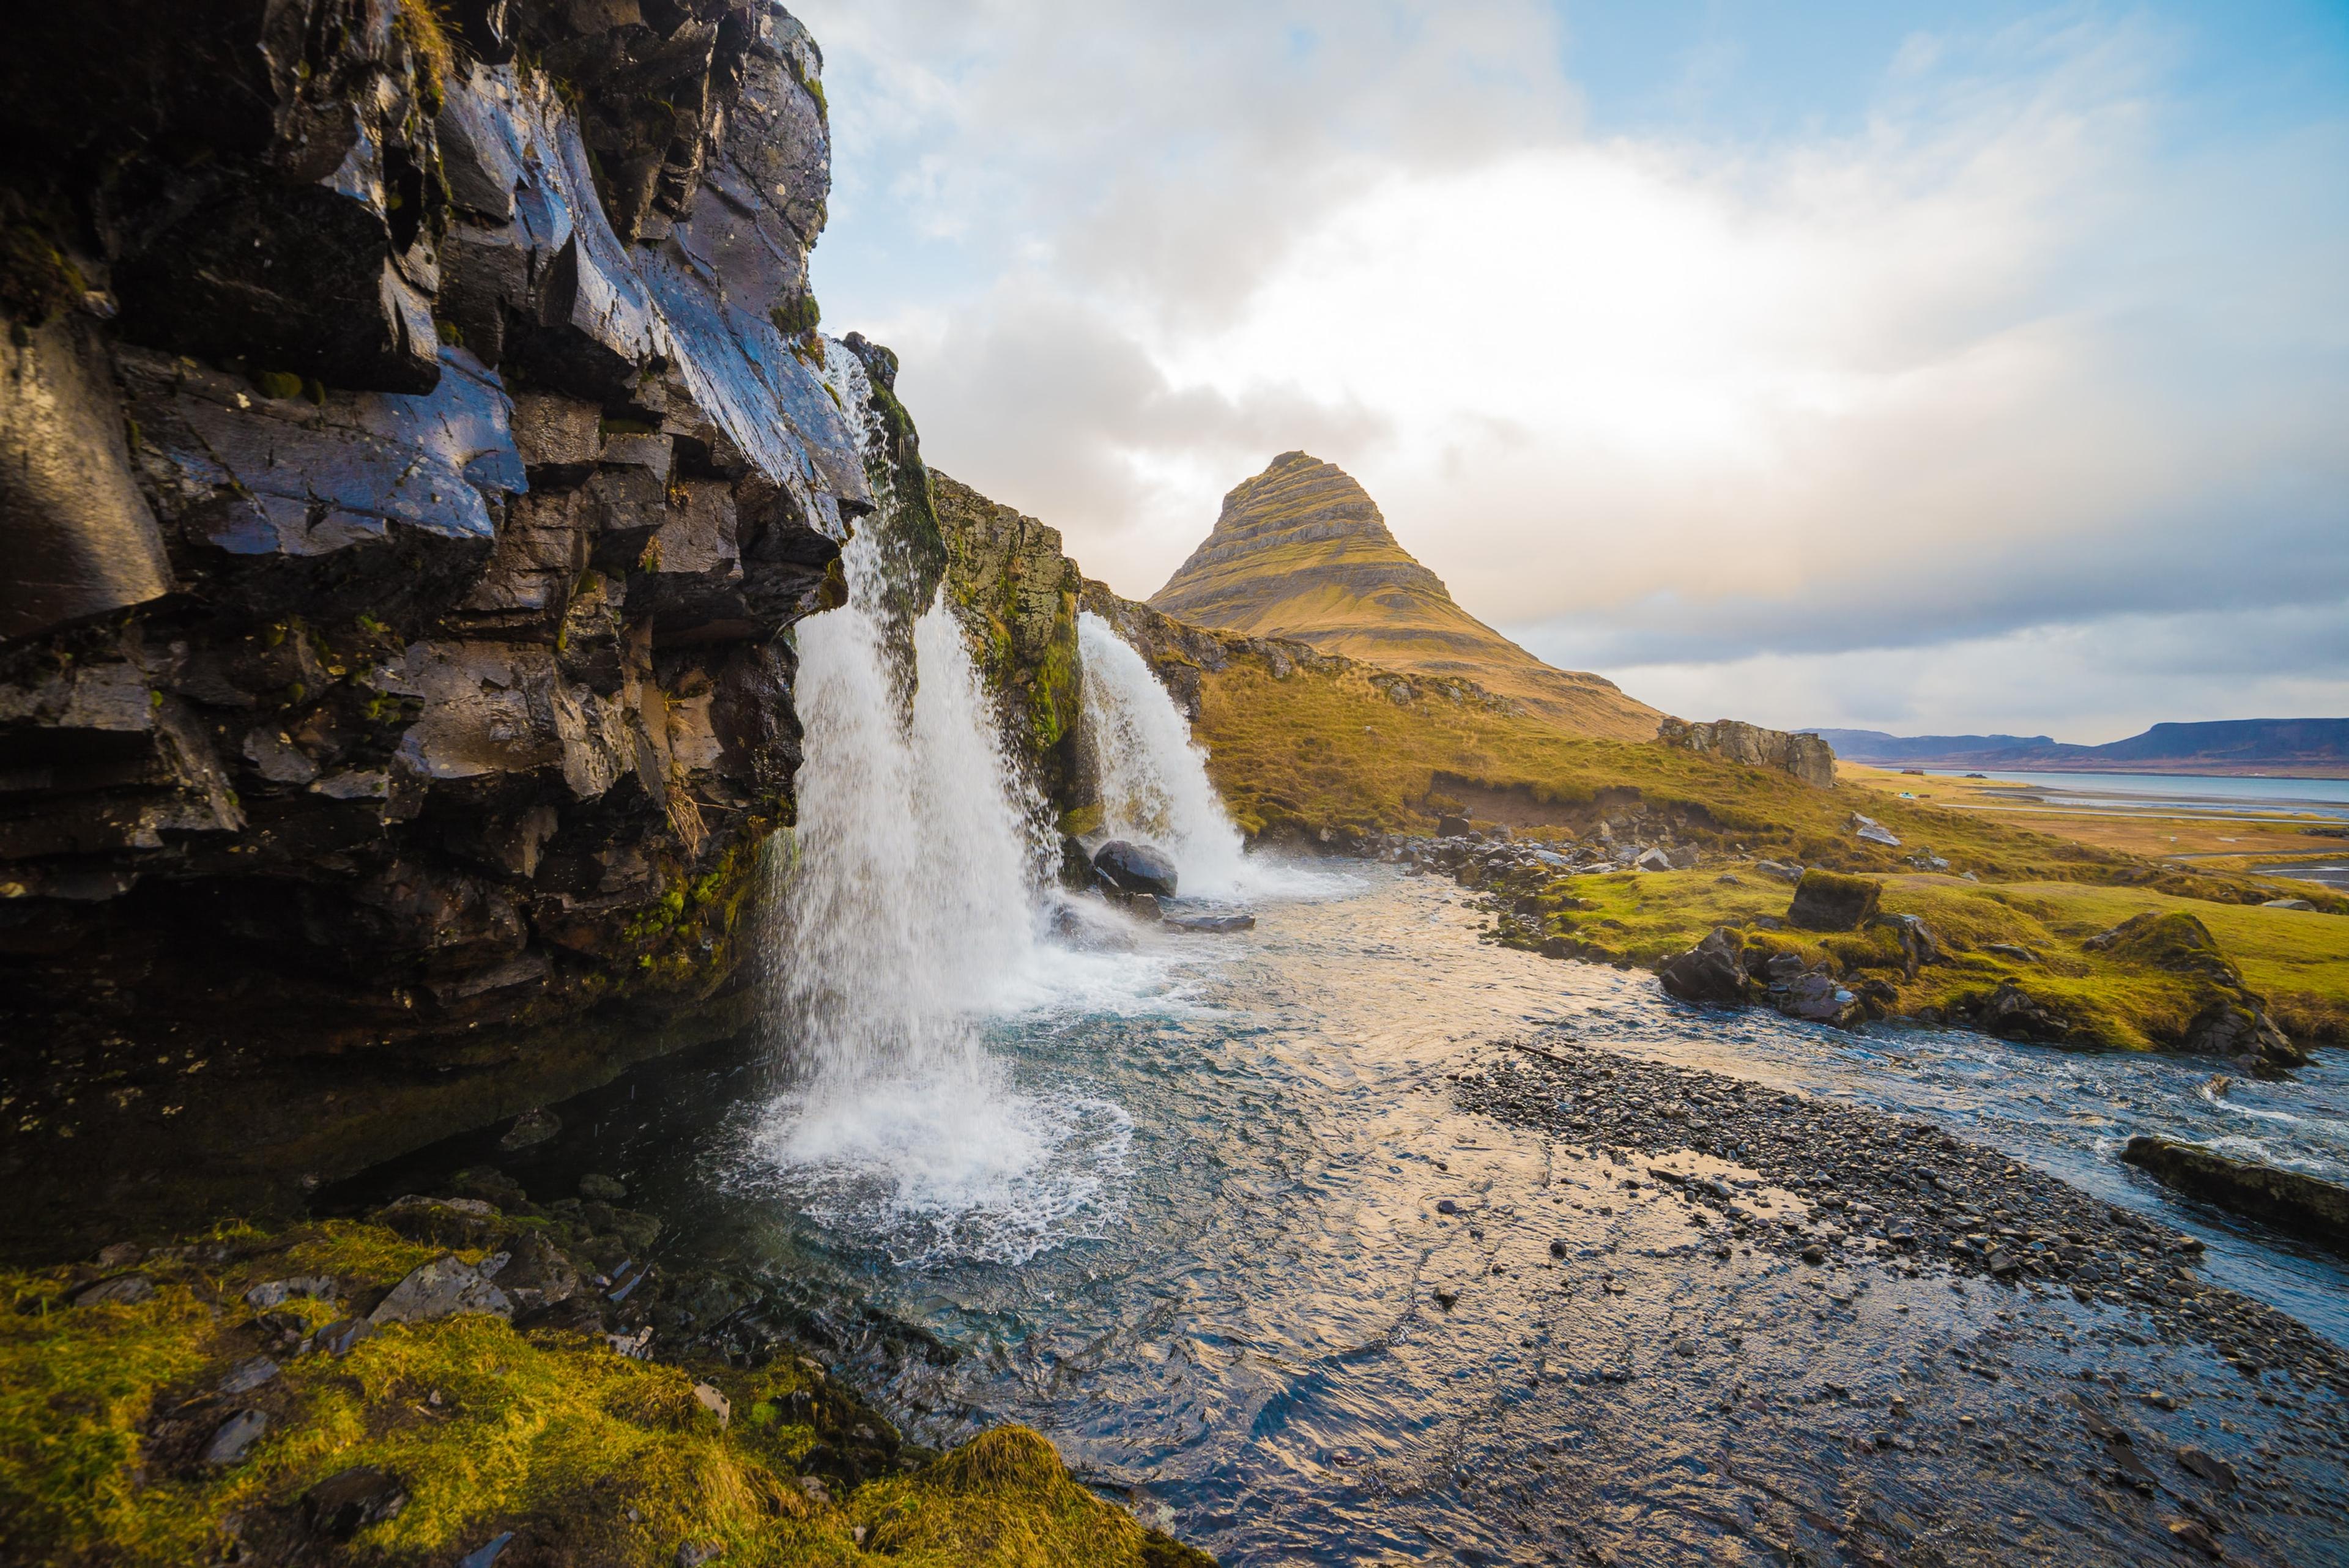 "Spectacular waterfalls cascading with the iconic Kirkjufell mountain as a breathtaking backdrop